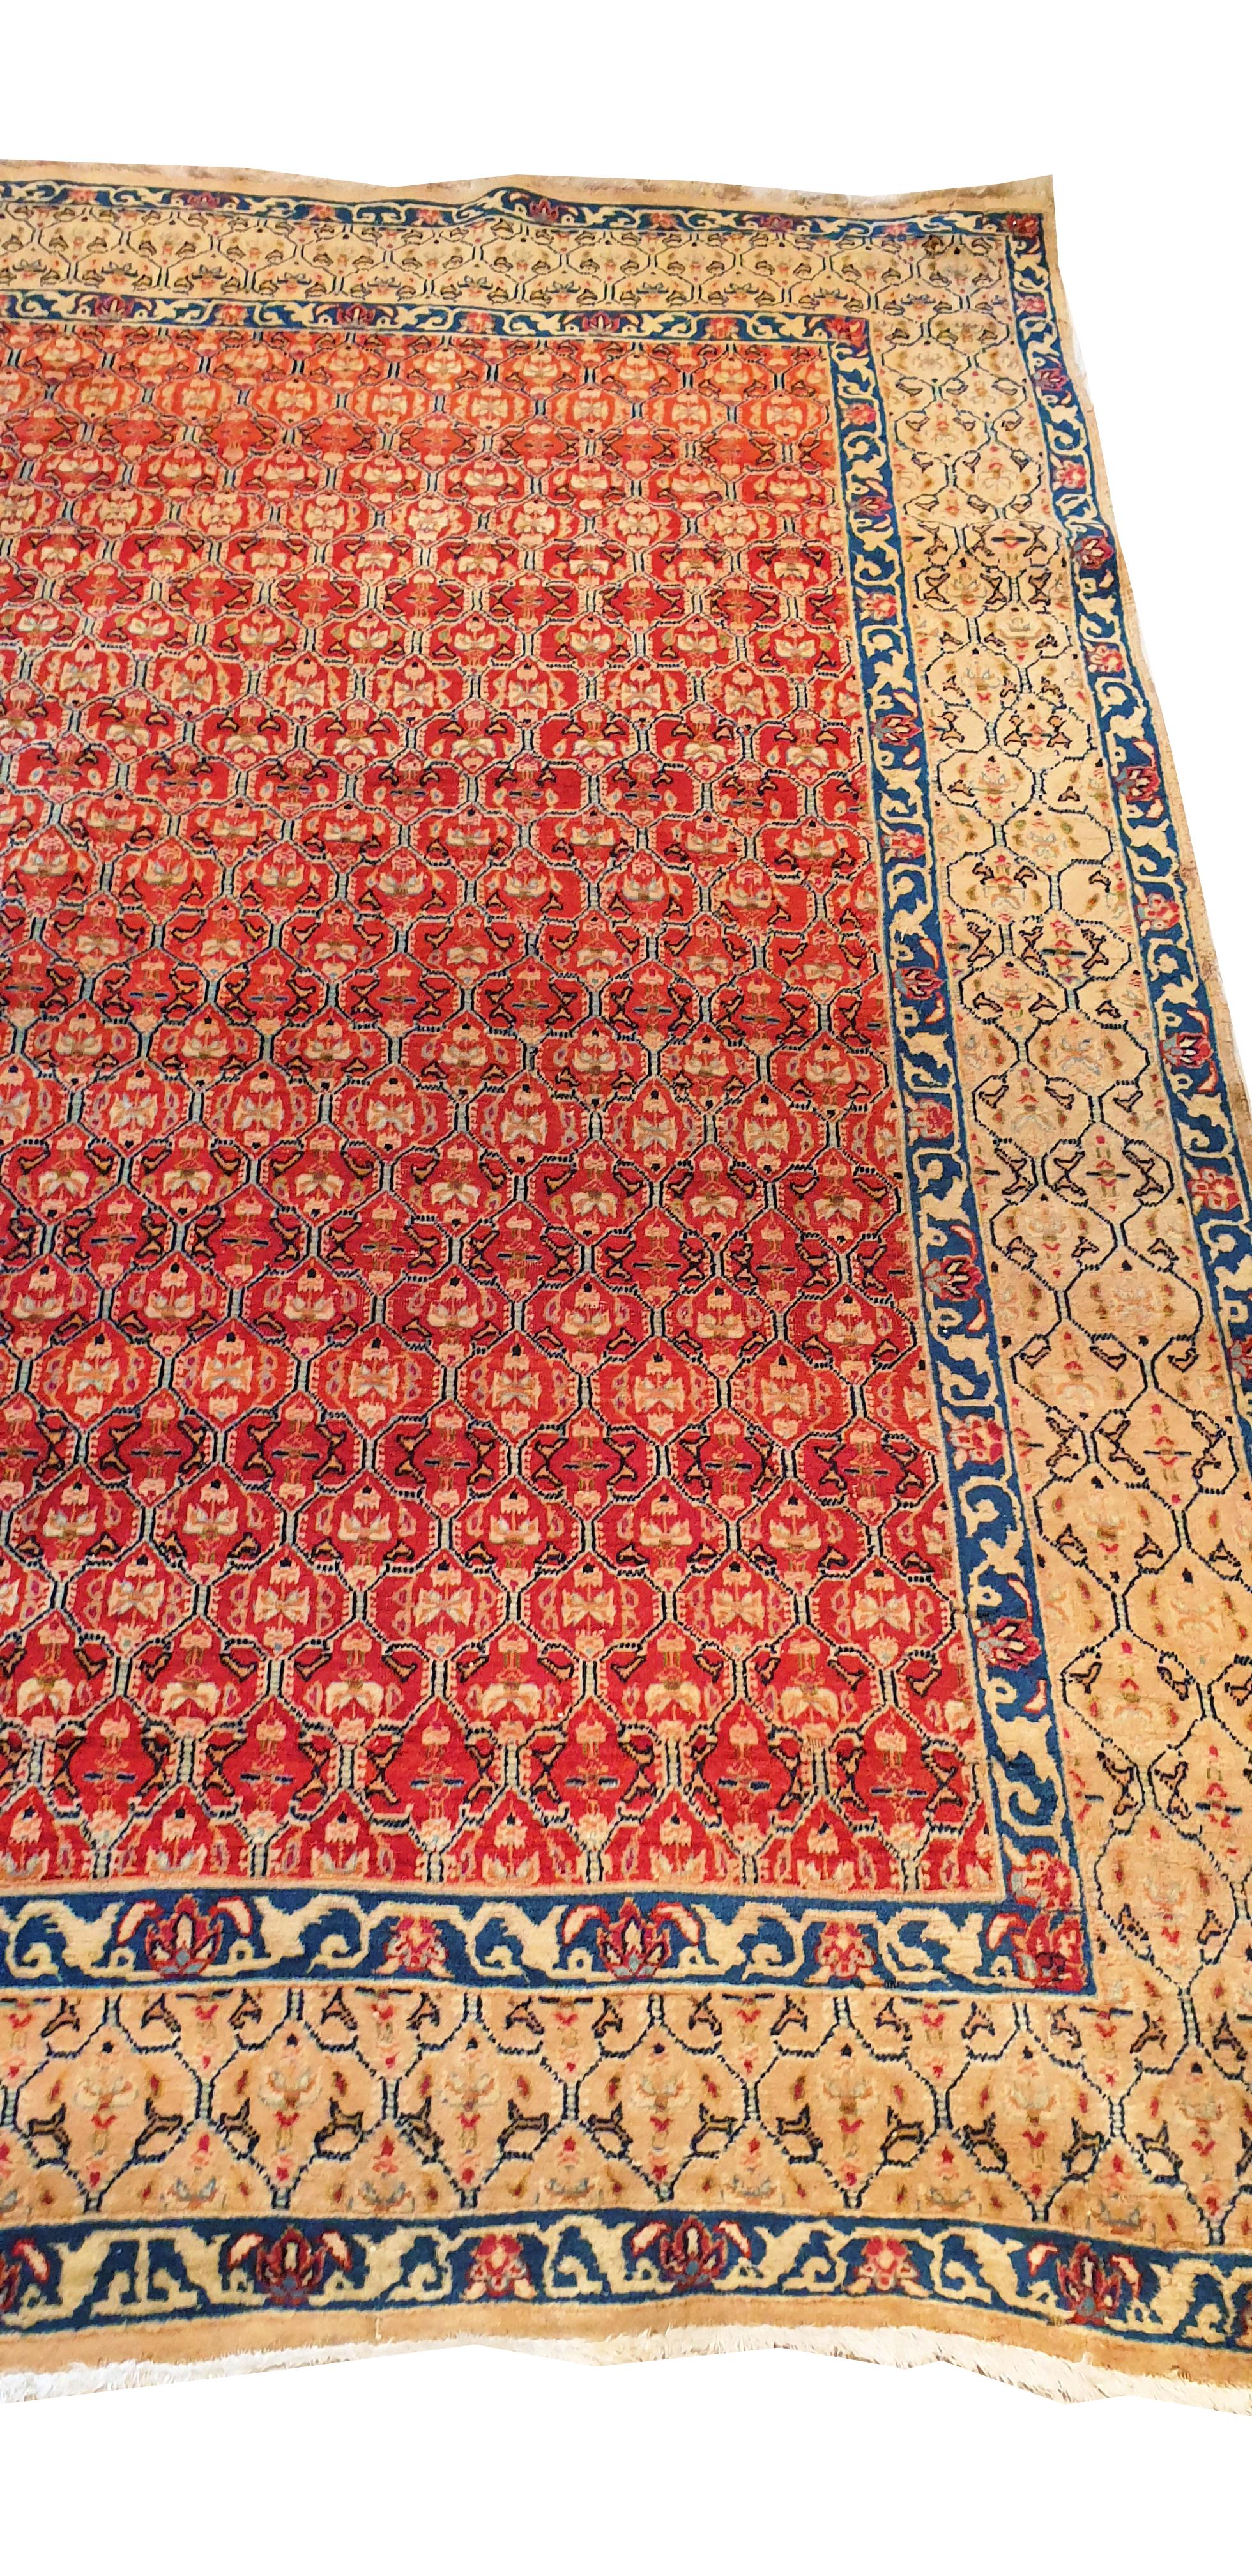 836 - Beautiful carpet from the 20th century with a nice pattern finely hand-knotted with wool velor on a cotton foundation.